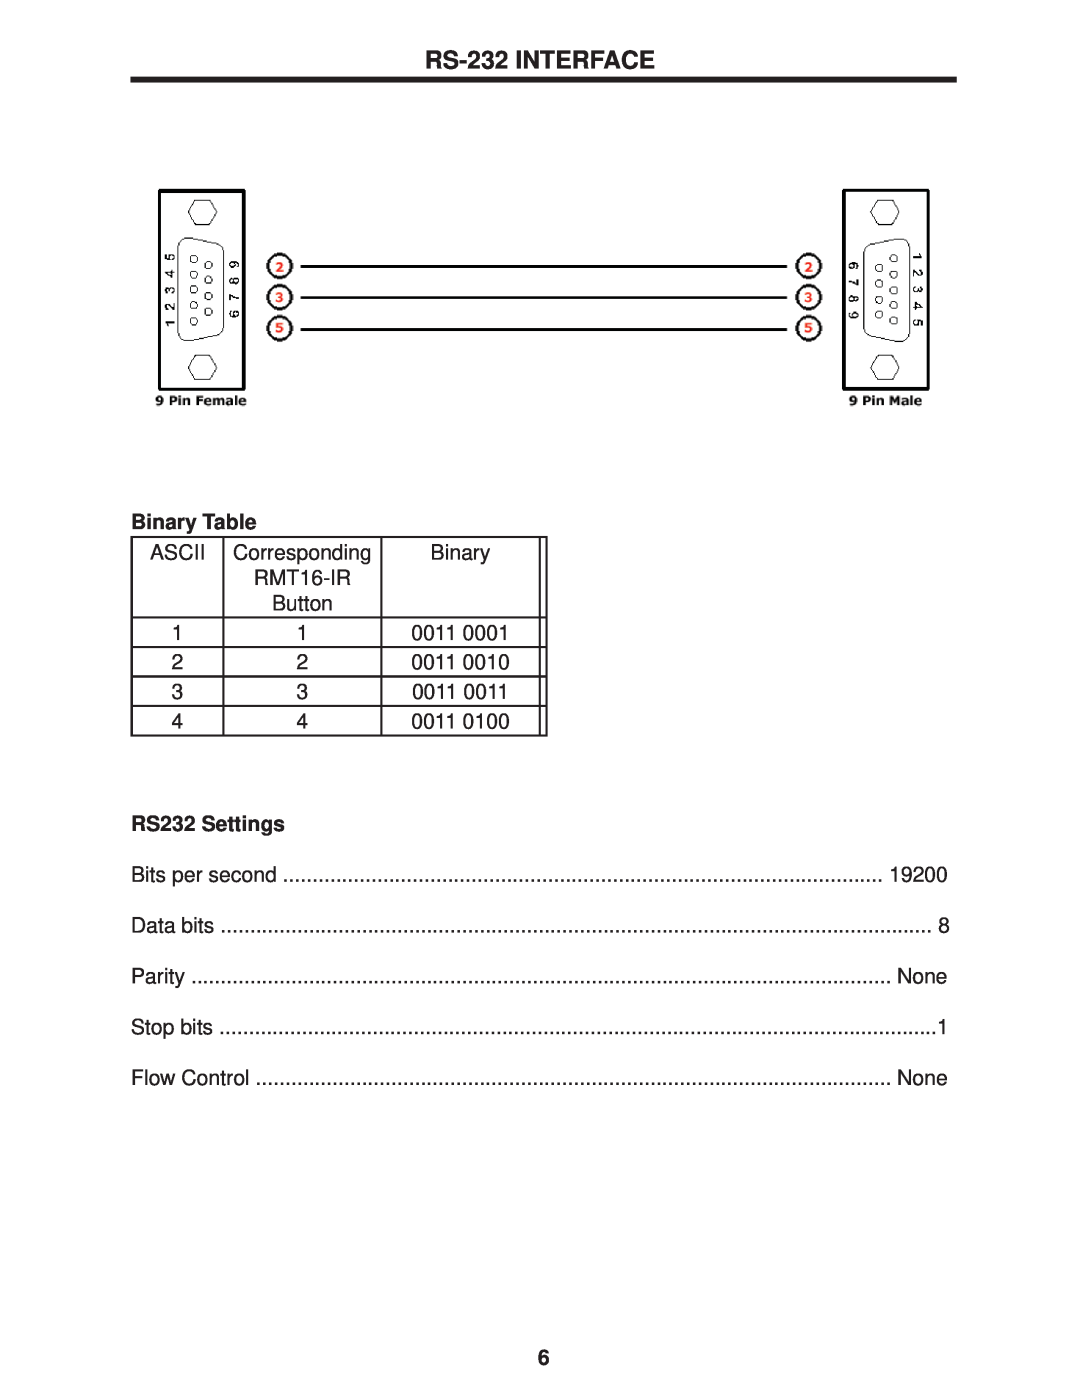 Gefen 4x1 DVI Switcher user manual RS-232 INTERFACE, Binary Table, RS232 Settings 